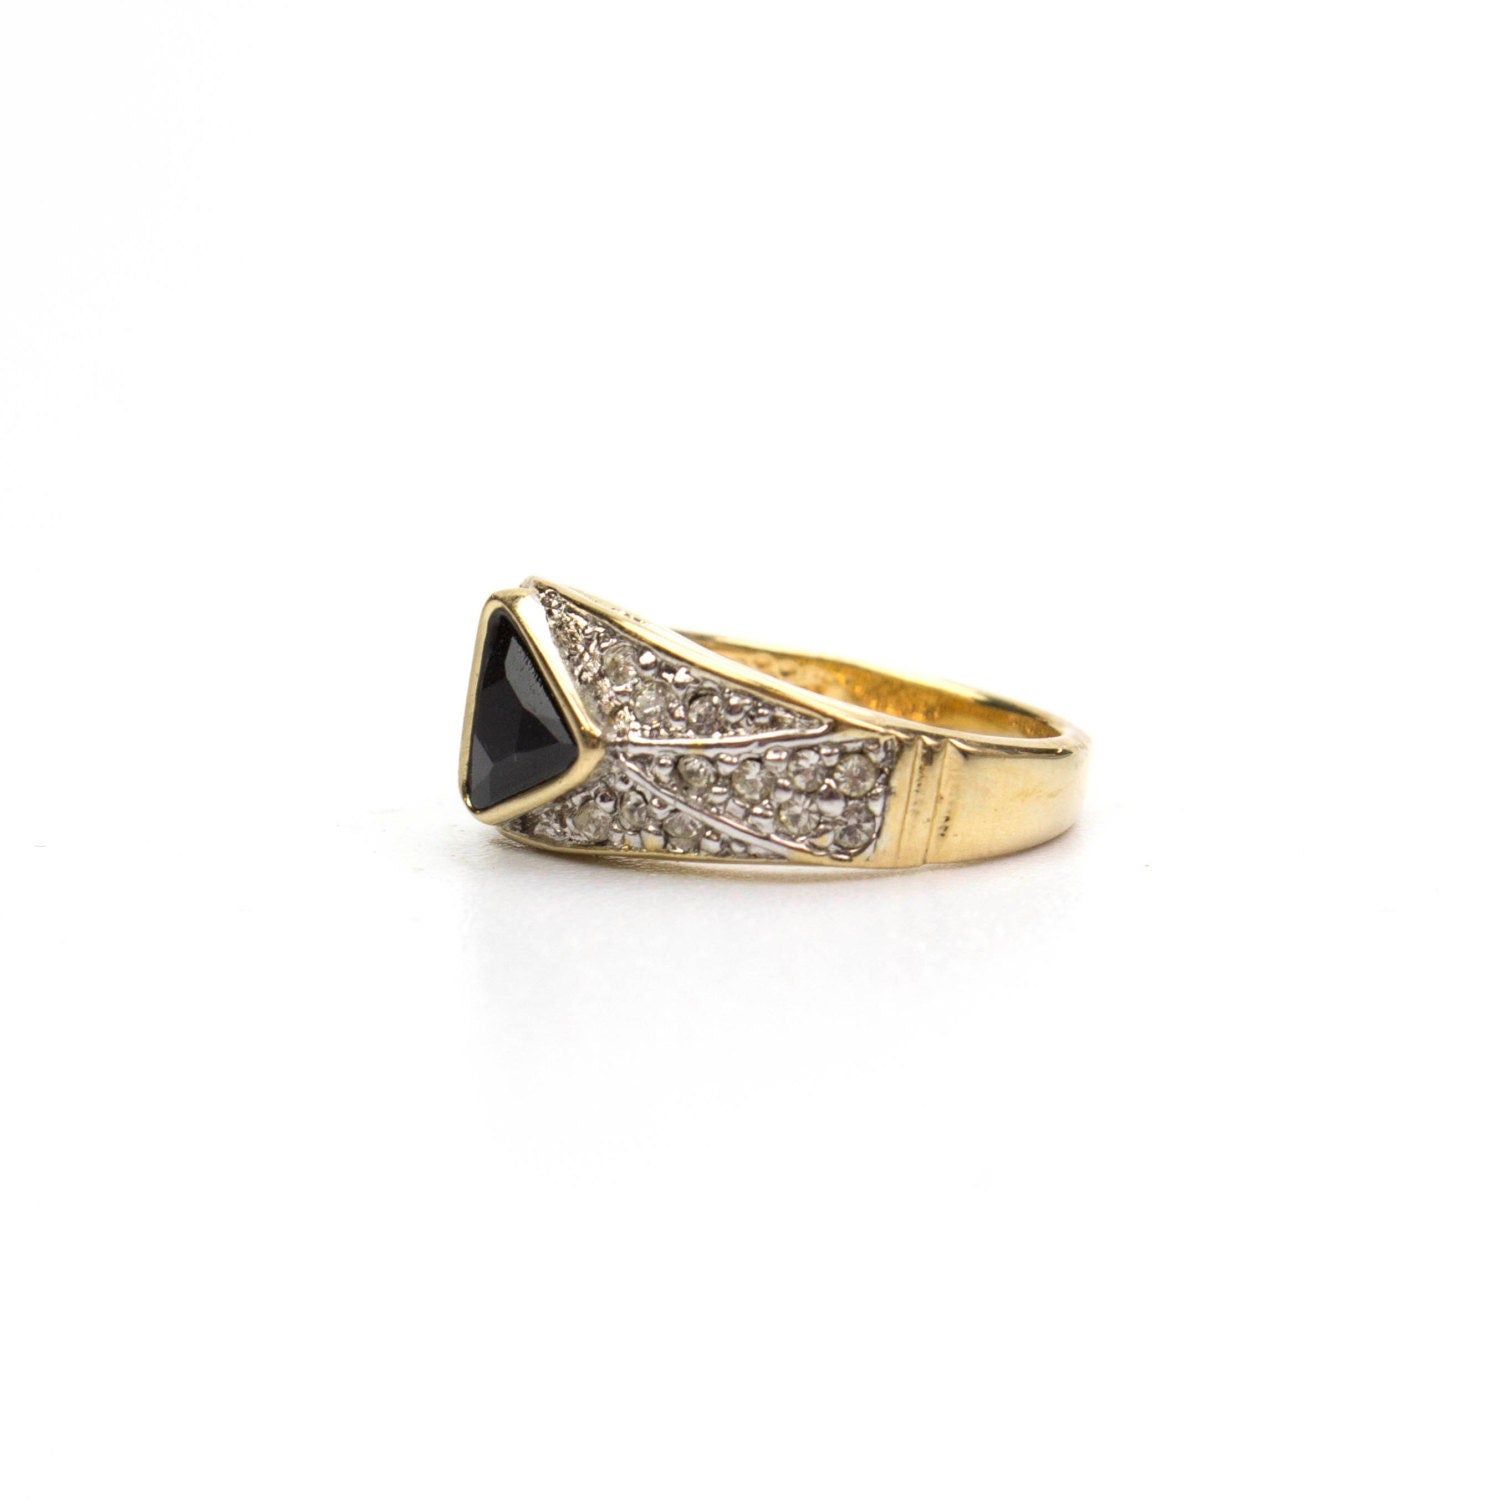 Vintage Ring Pave Trillion Cut Black and Clear Swarovski Crystals 18k Gold  R2932 - Limited Stock - Never Worn